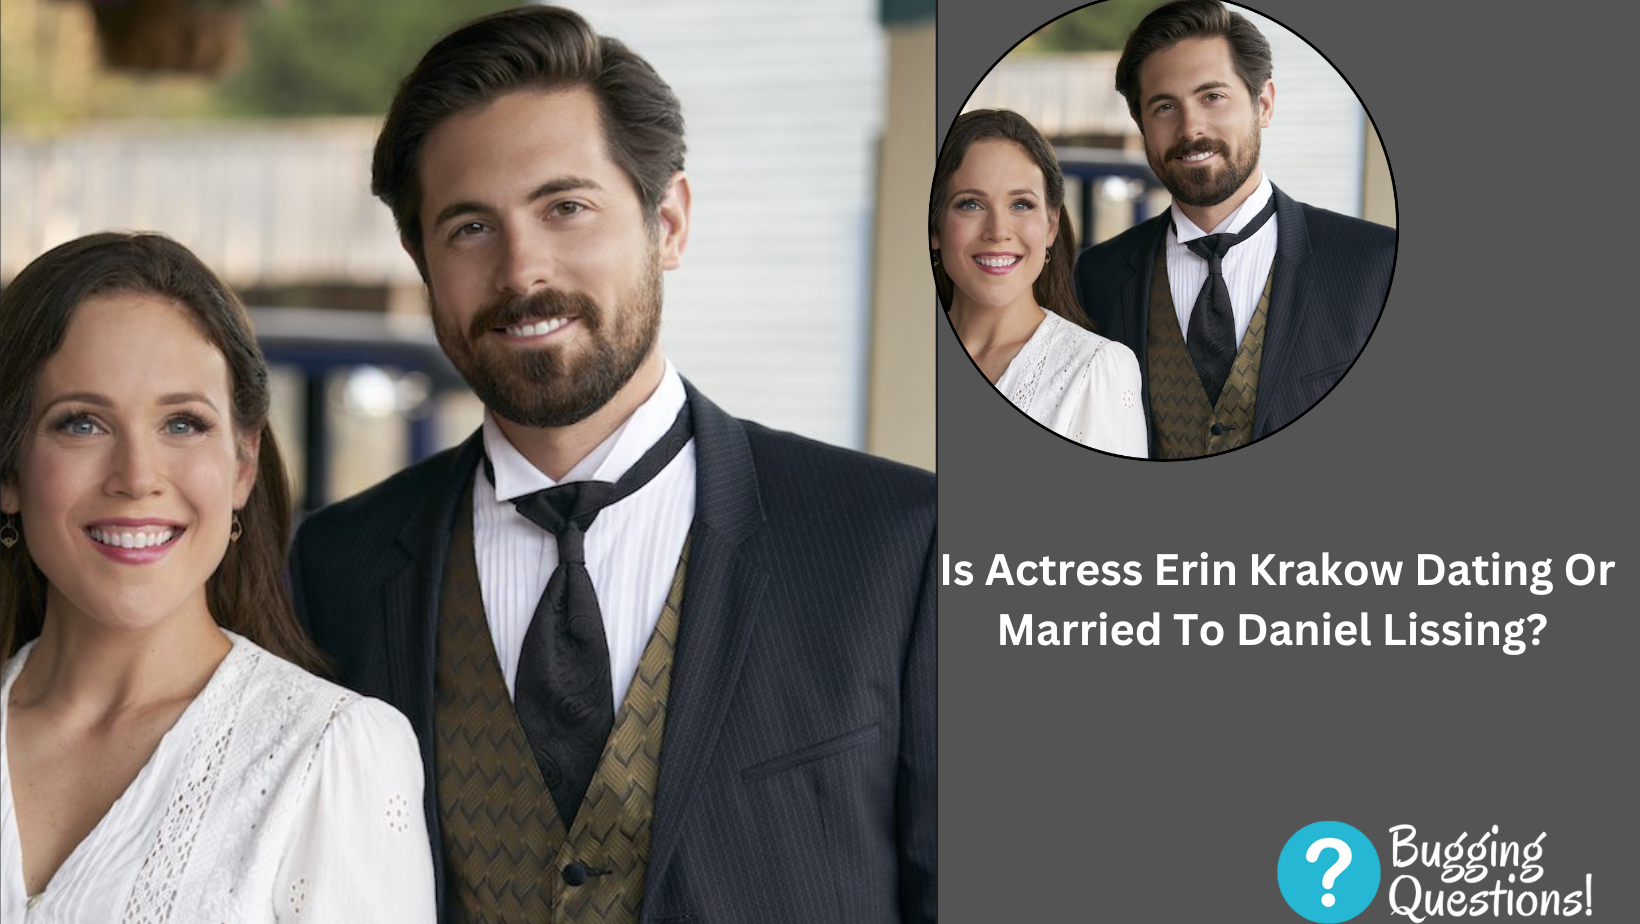 Is Actress Erin Krakow Dating Or Married To Daniel Lissing?